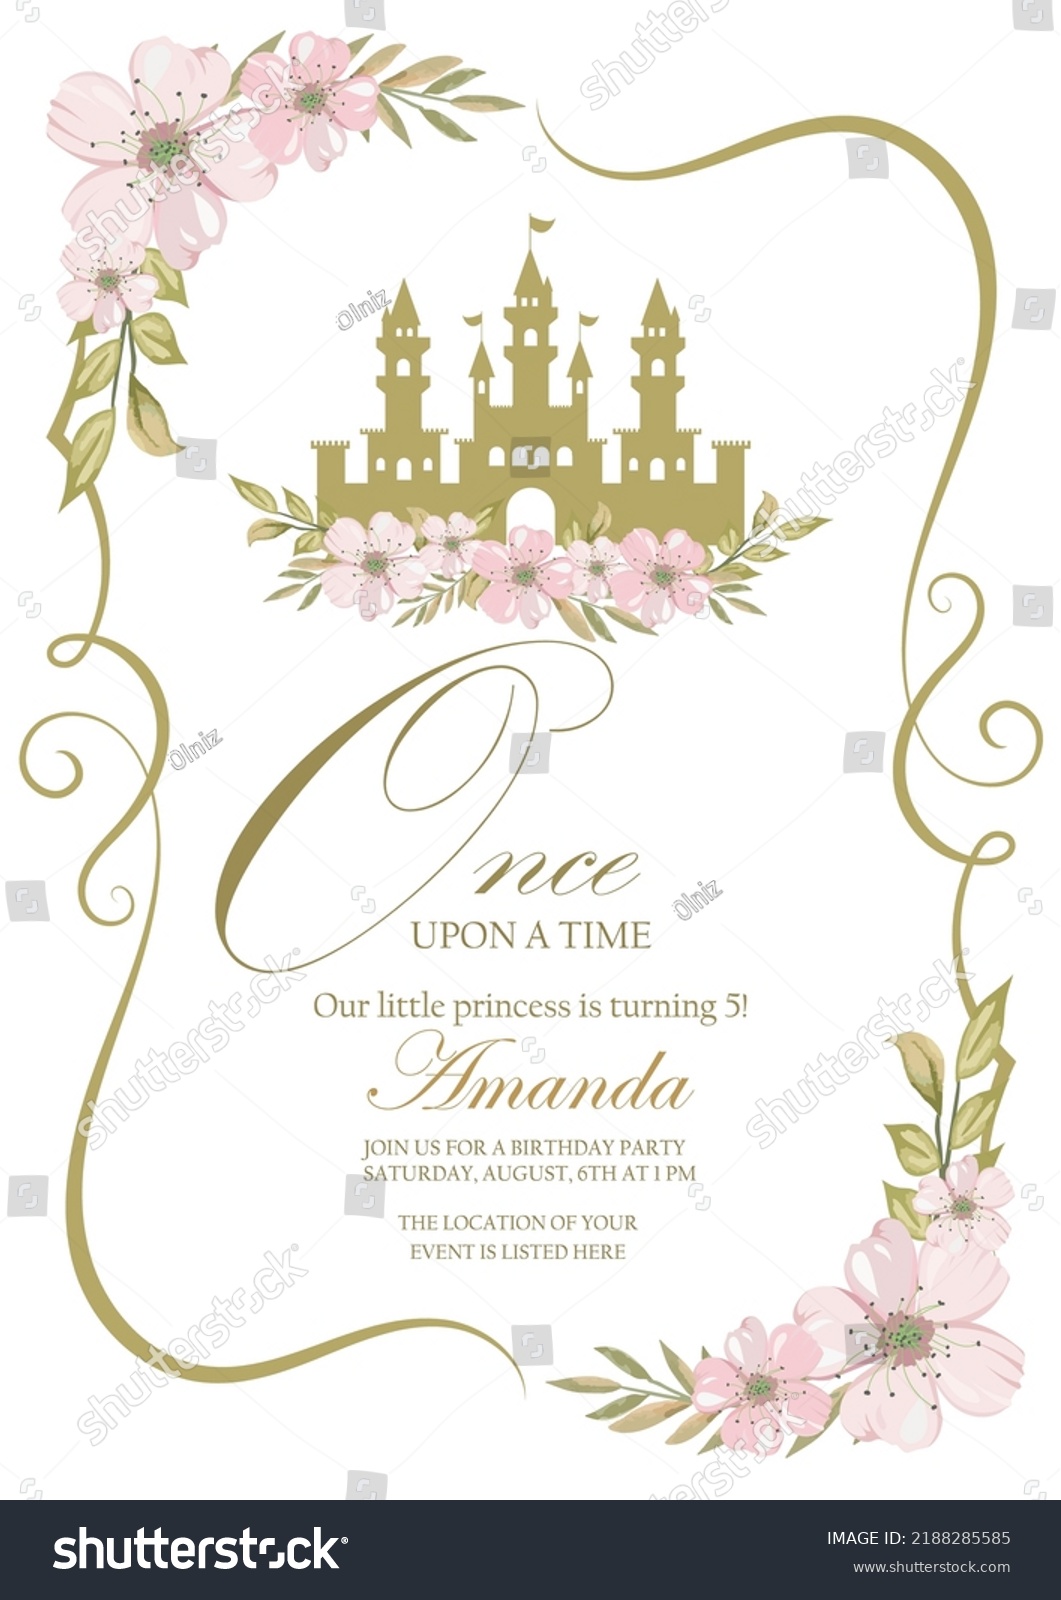 SVG of cinderella invitation. Invitation to the princess's birthday party. Template for baby shower invitation. It is a girl svg